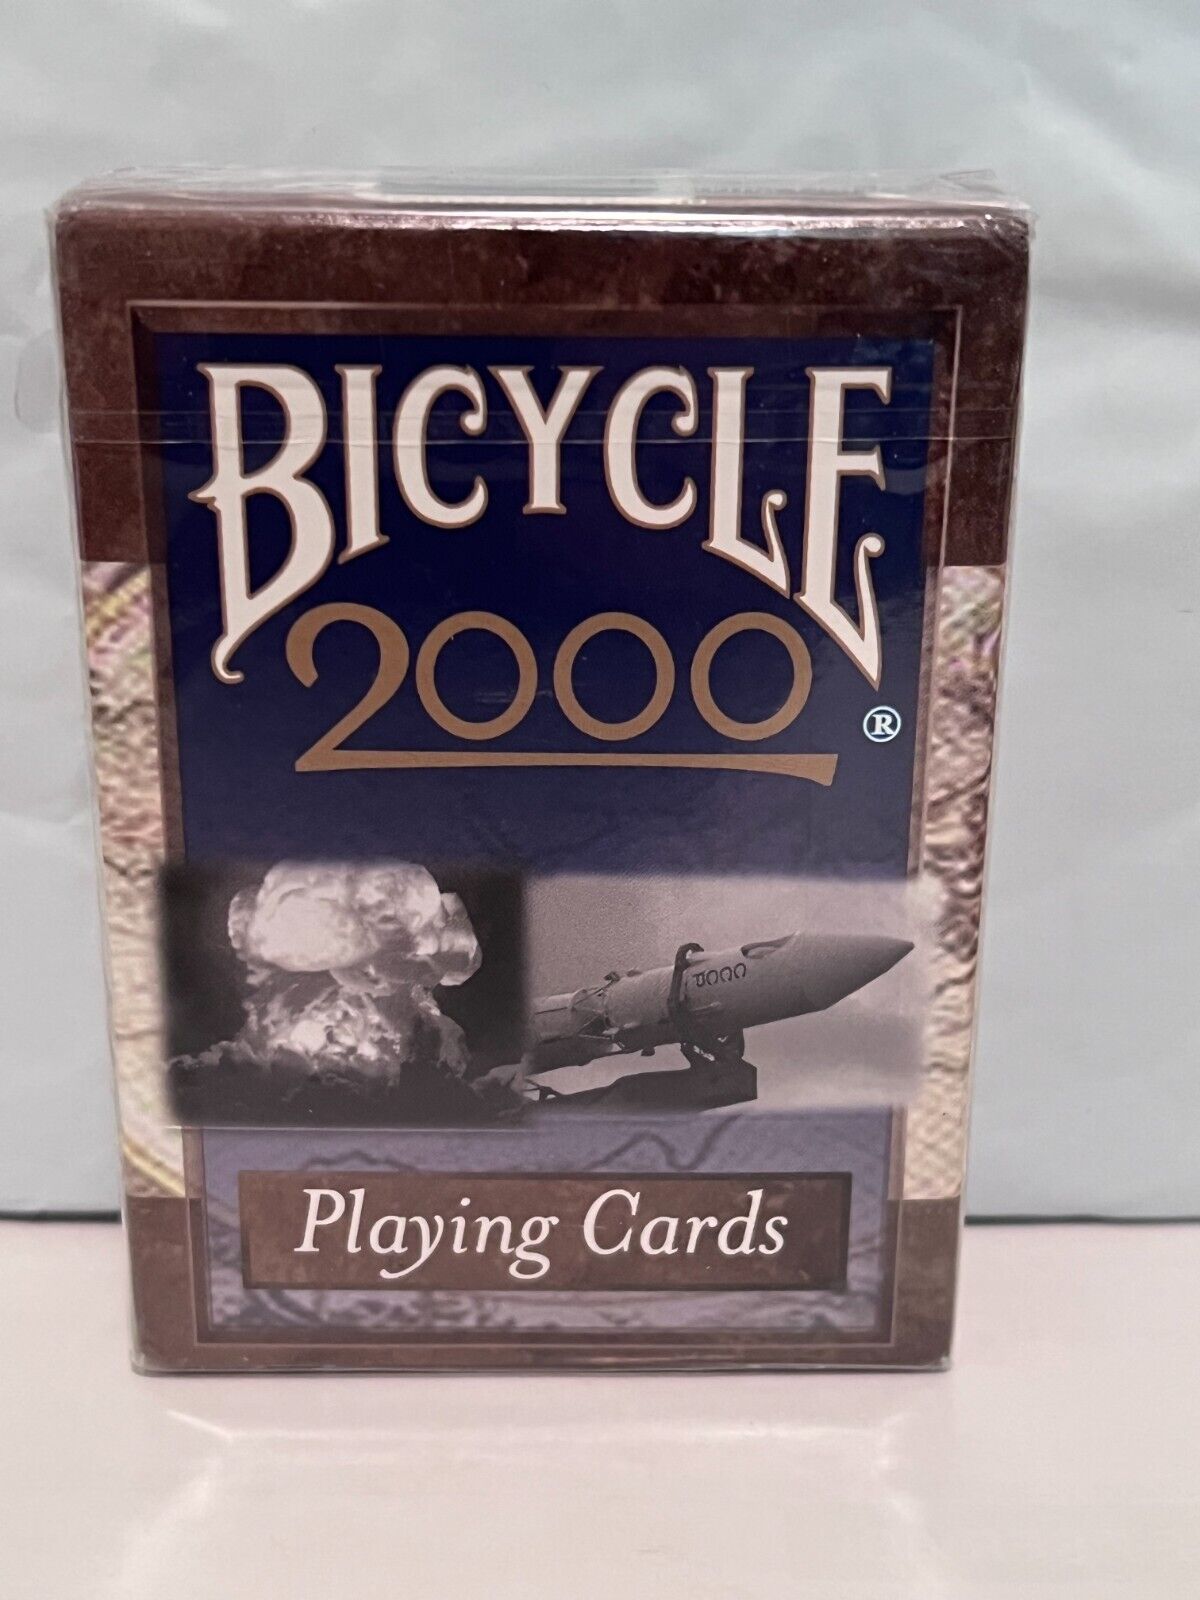  Bicycle Playing Cards: Bicycle 2000: NEW:  One Deck